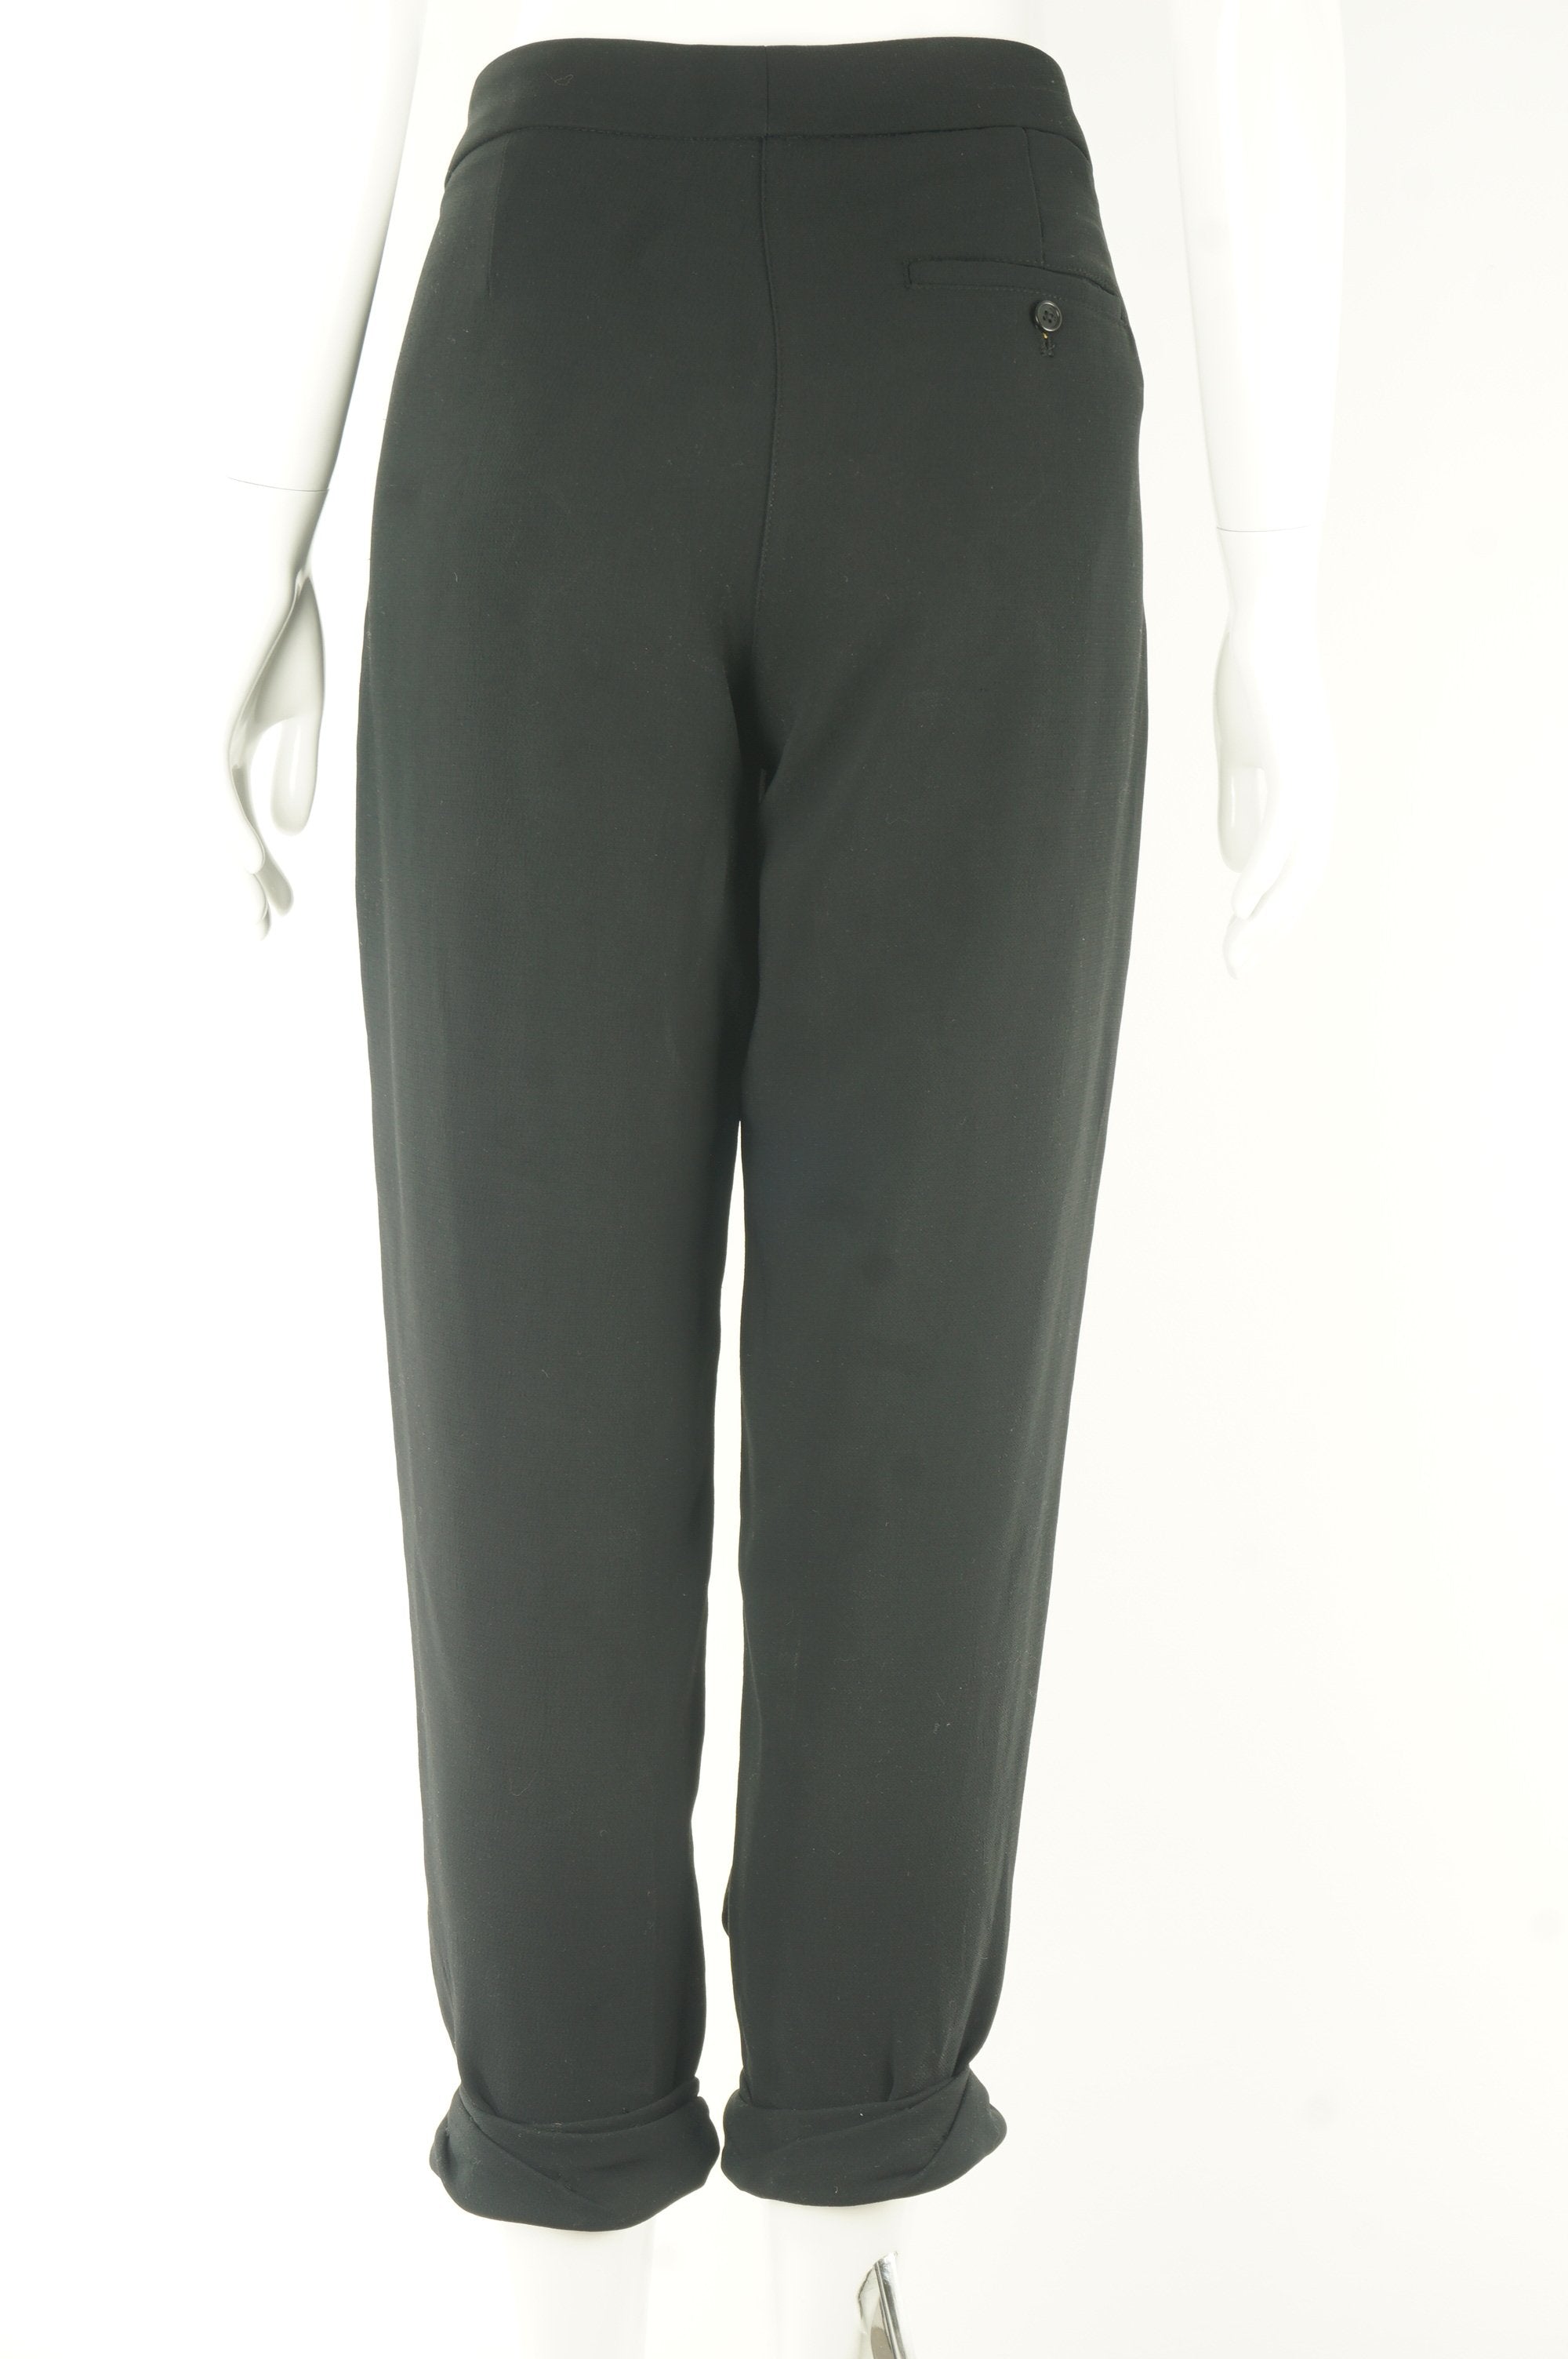 Black Dress Pants for Women Business Casual High Waisted Ankle